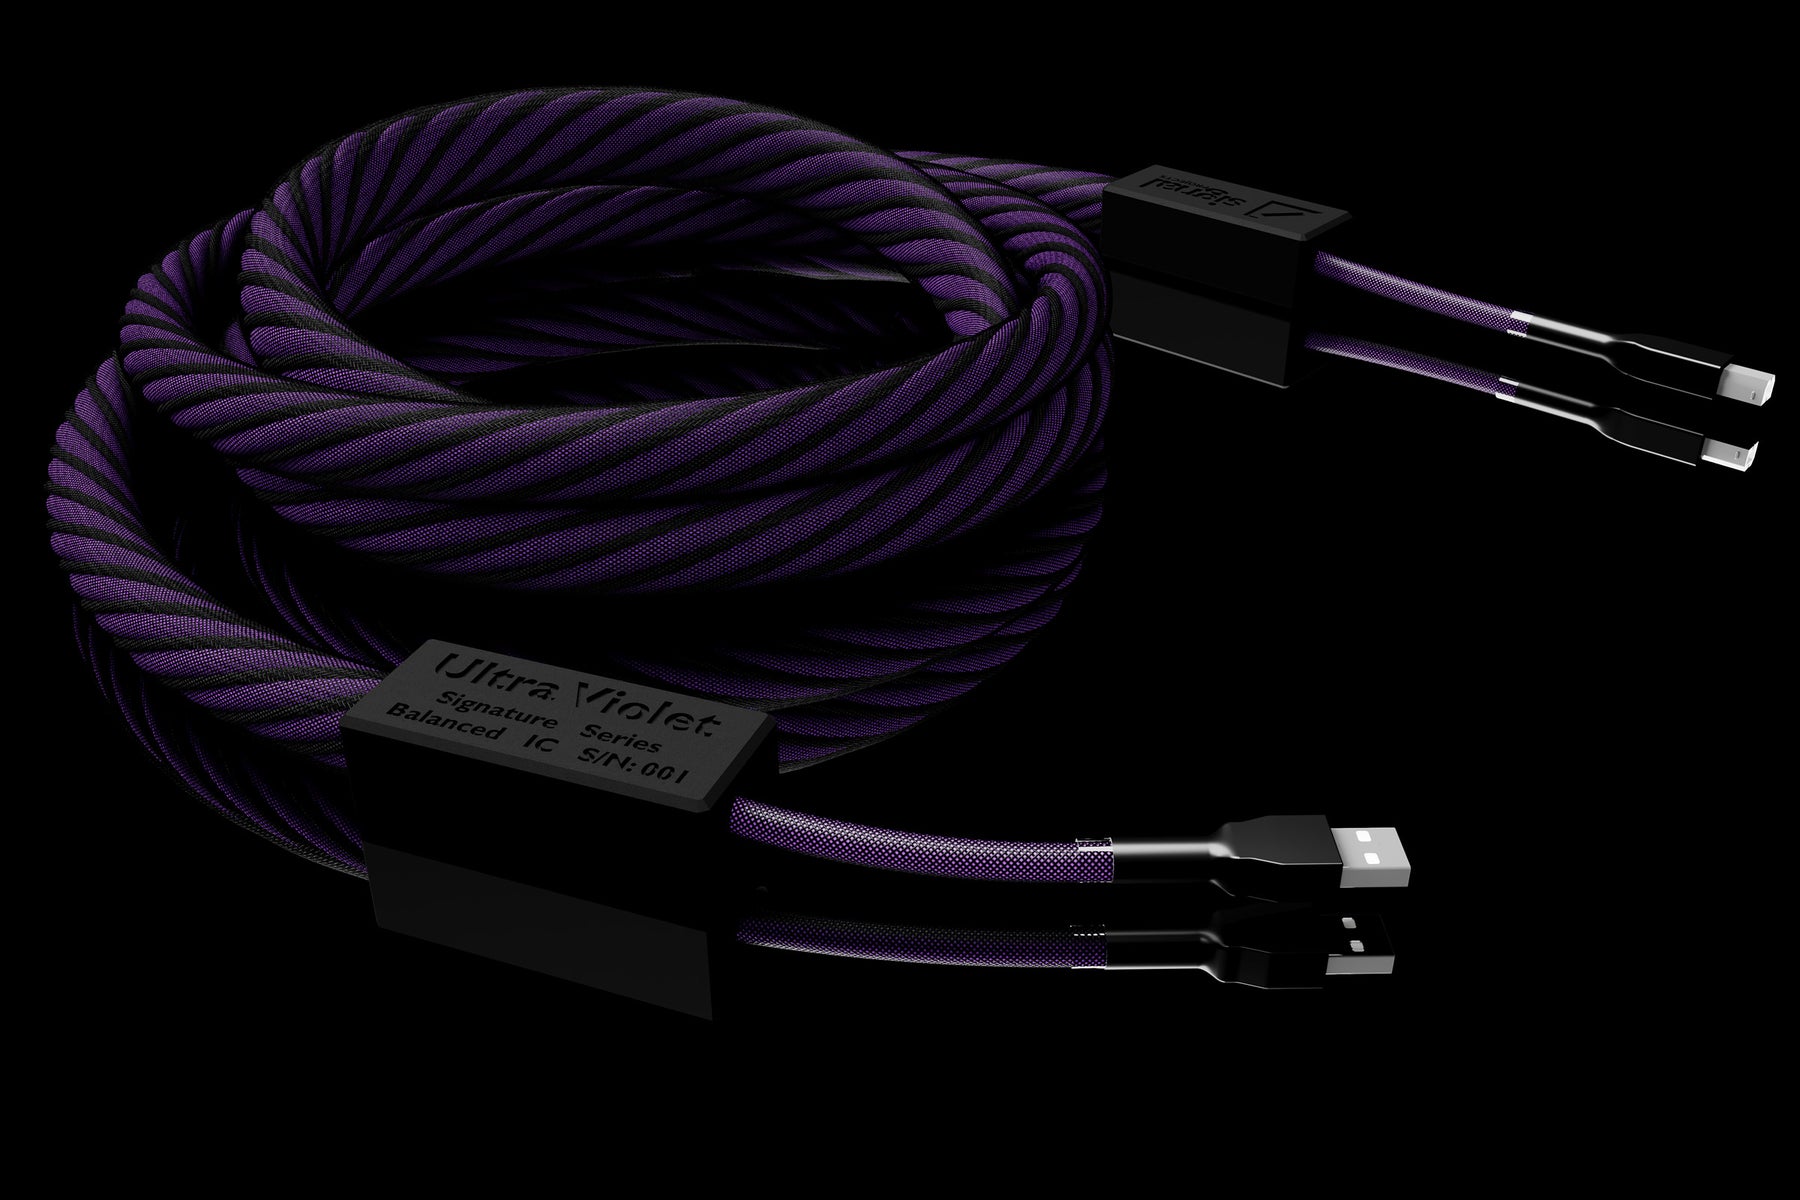 Signal Projects UltraViolet Cavo USB - PRONTA CONSEGNA